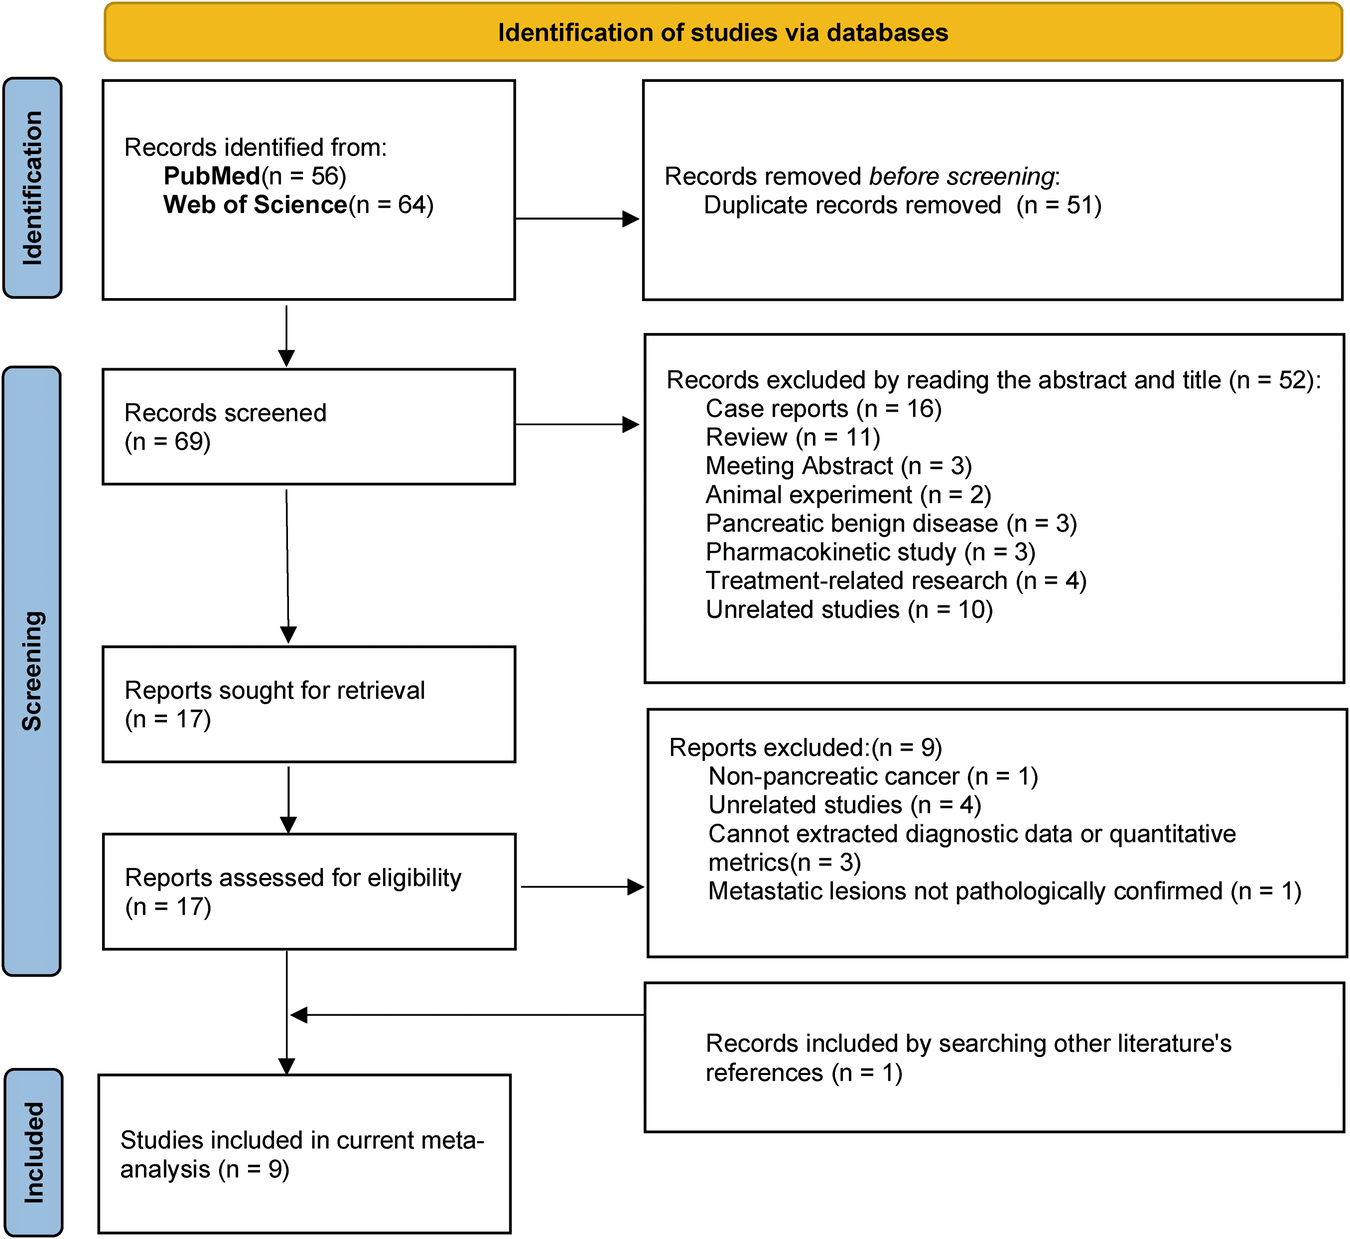 Performance of fibroblast activating protein inhibitor PET imaging for pancreatic neoplasms assessment: a systematic review and meta-analysis